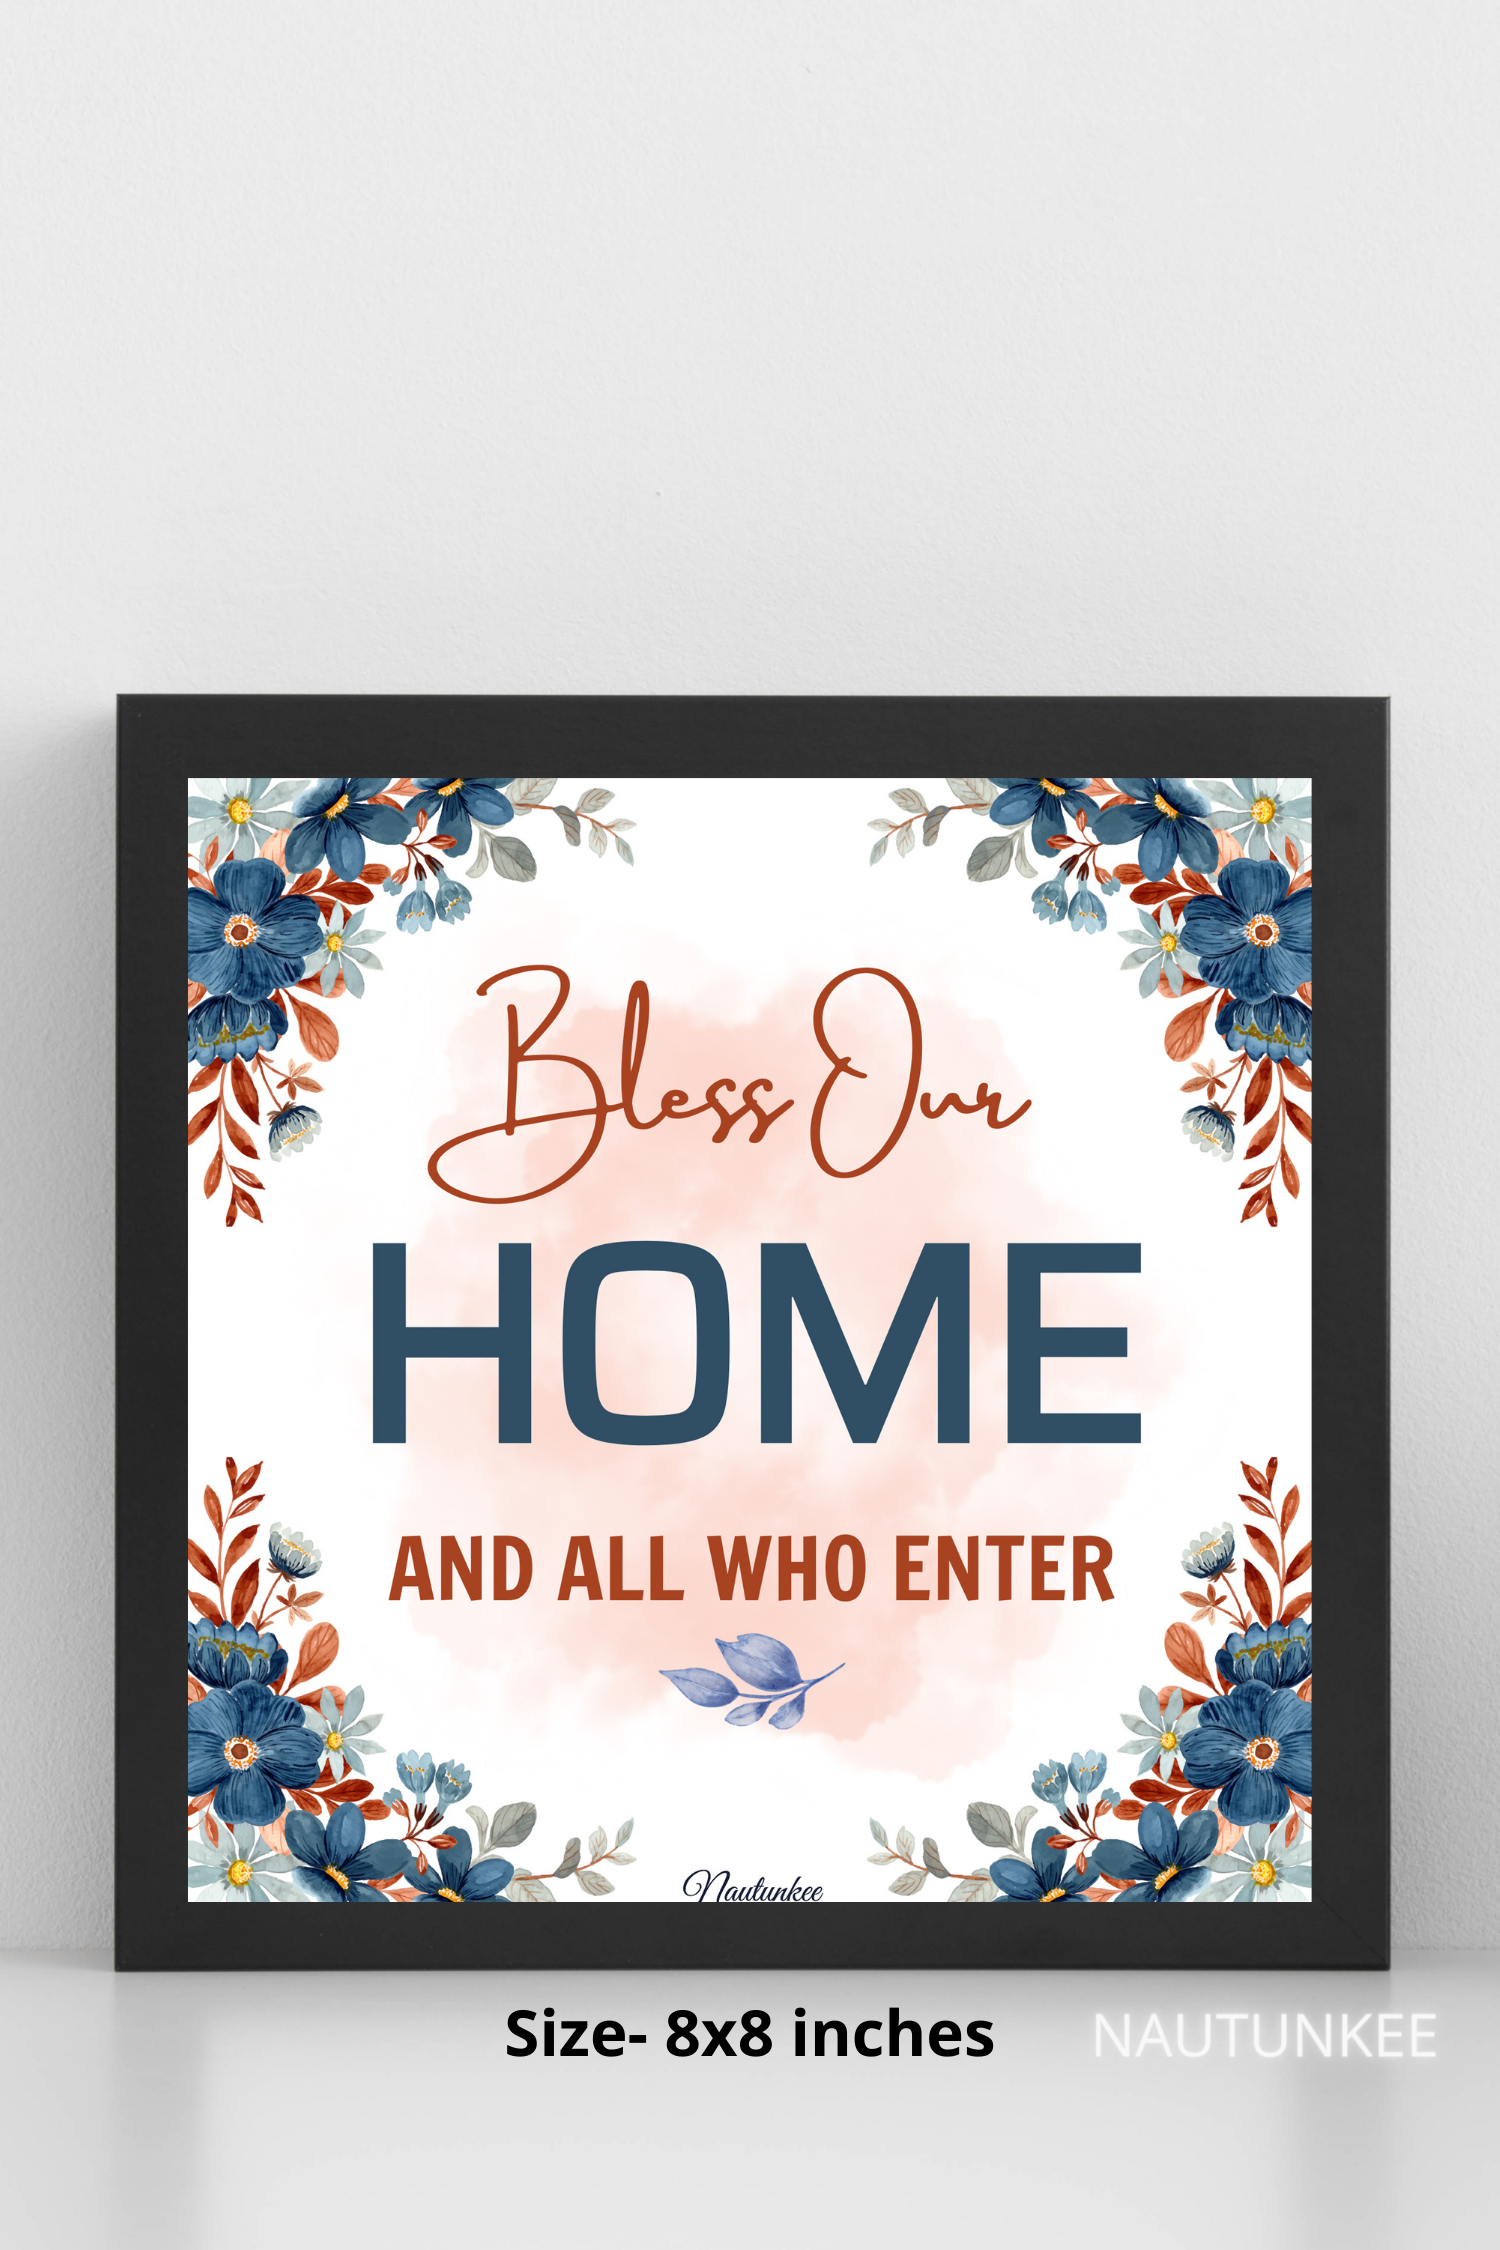 Bless This Home And All Who Enter Wall Decor - nautunkee